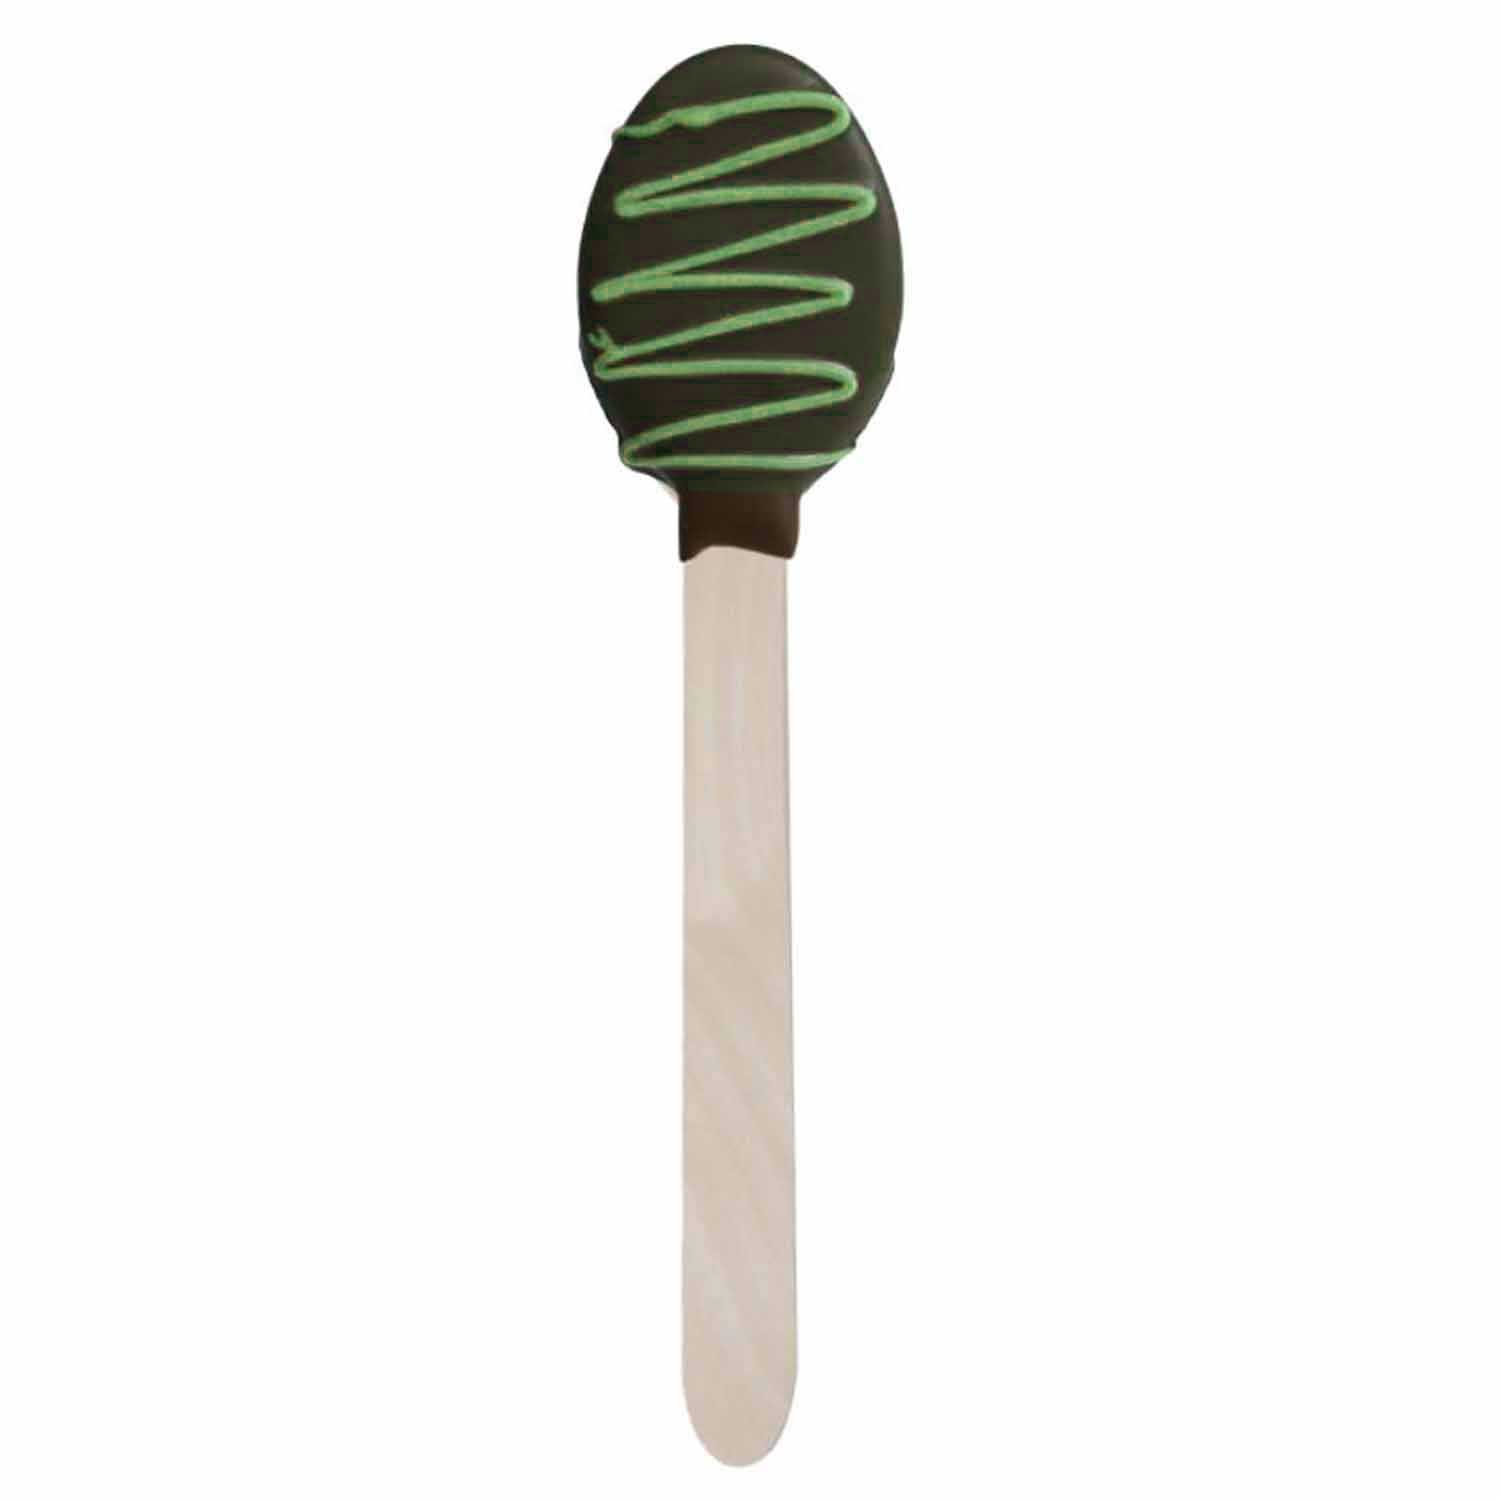 Mint Chocolate Dipped Spoon